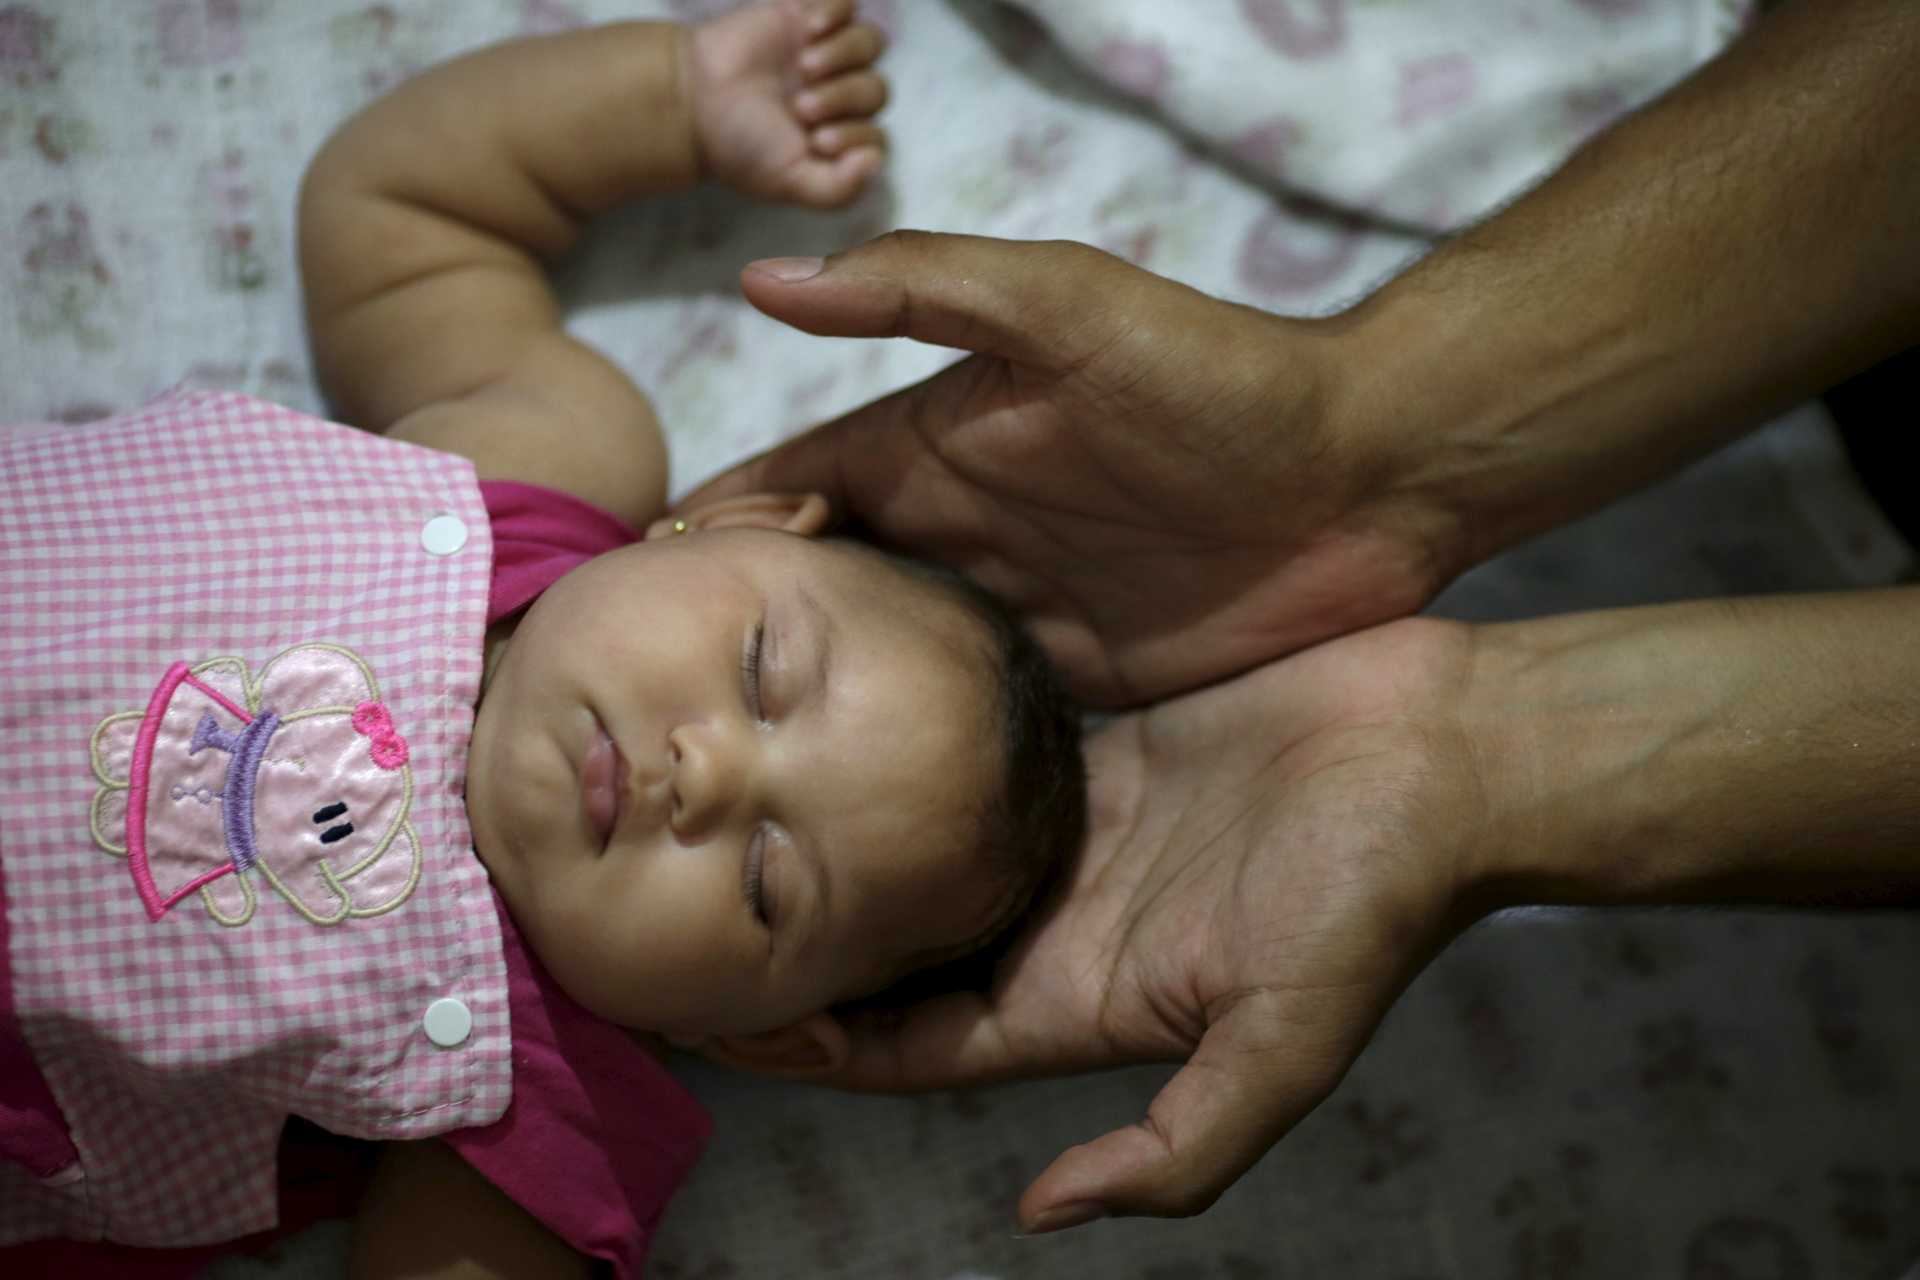 Felipe holds the head of his daughter Maria Geovana, who has microcephaly, at his house in Recife